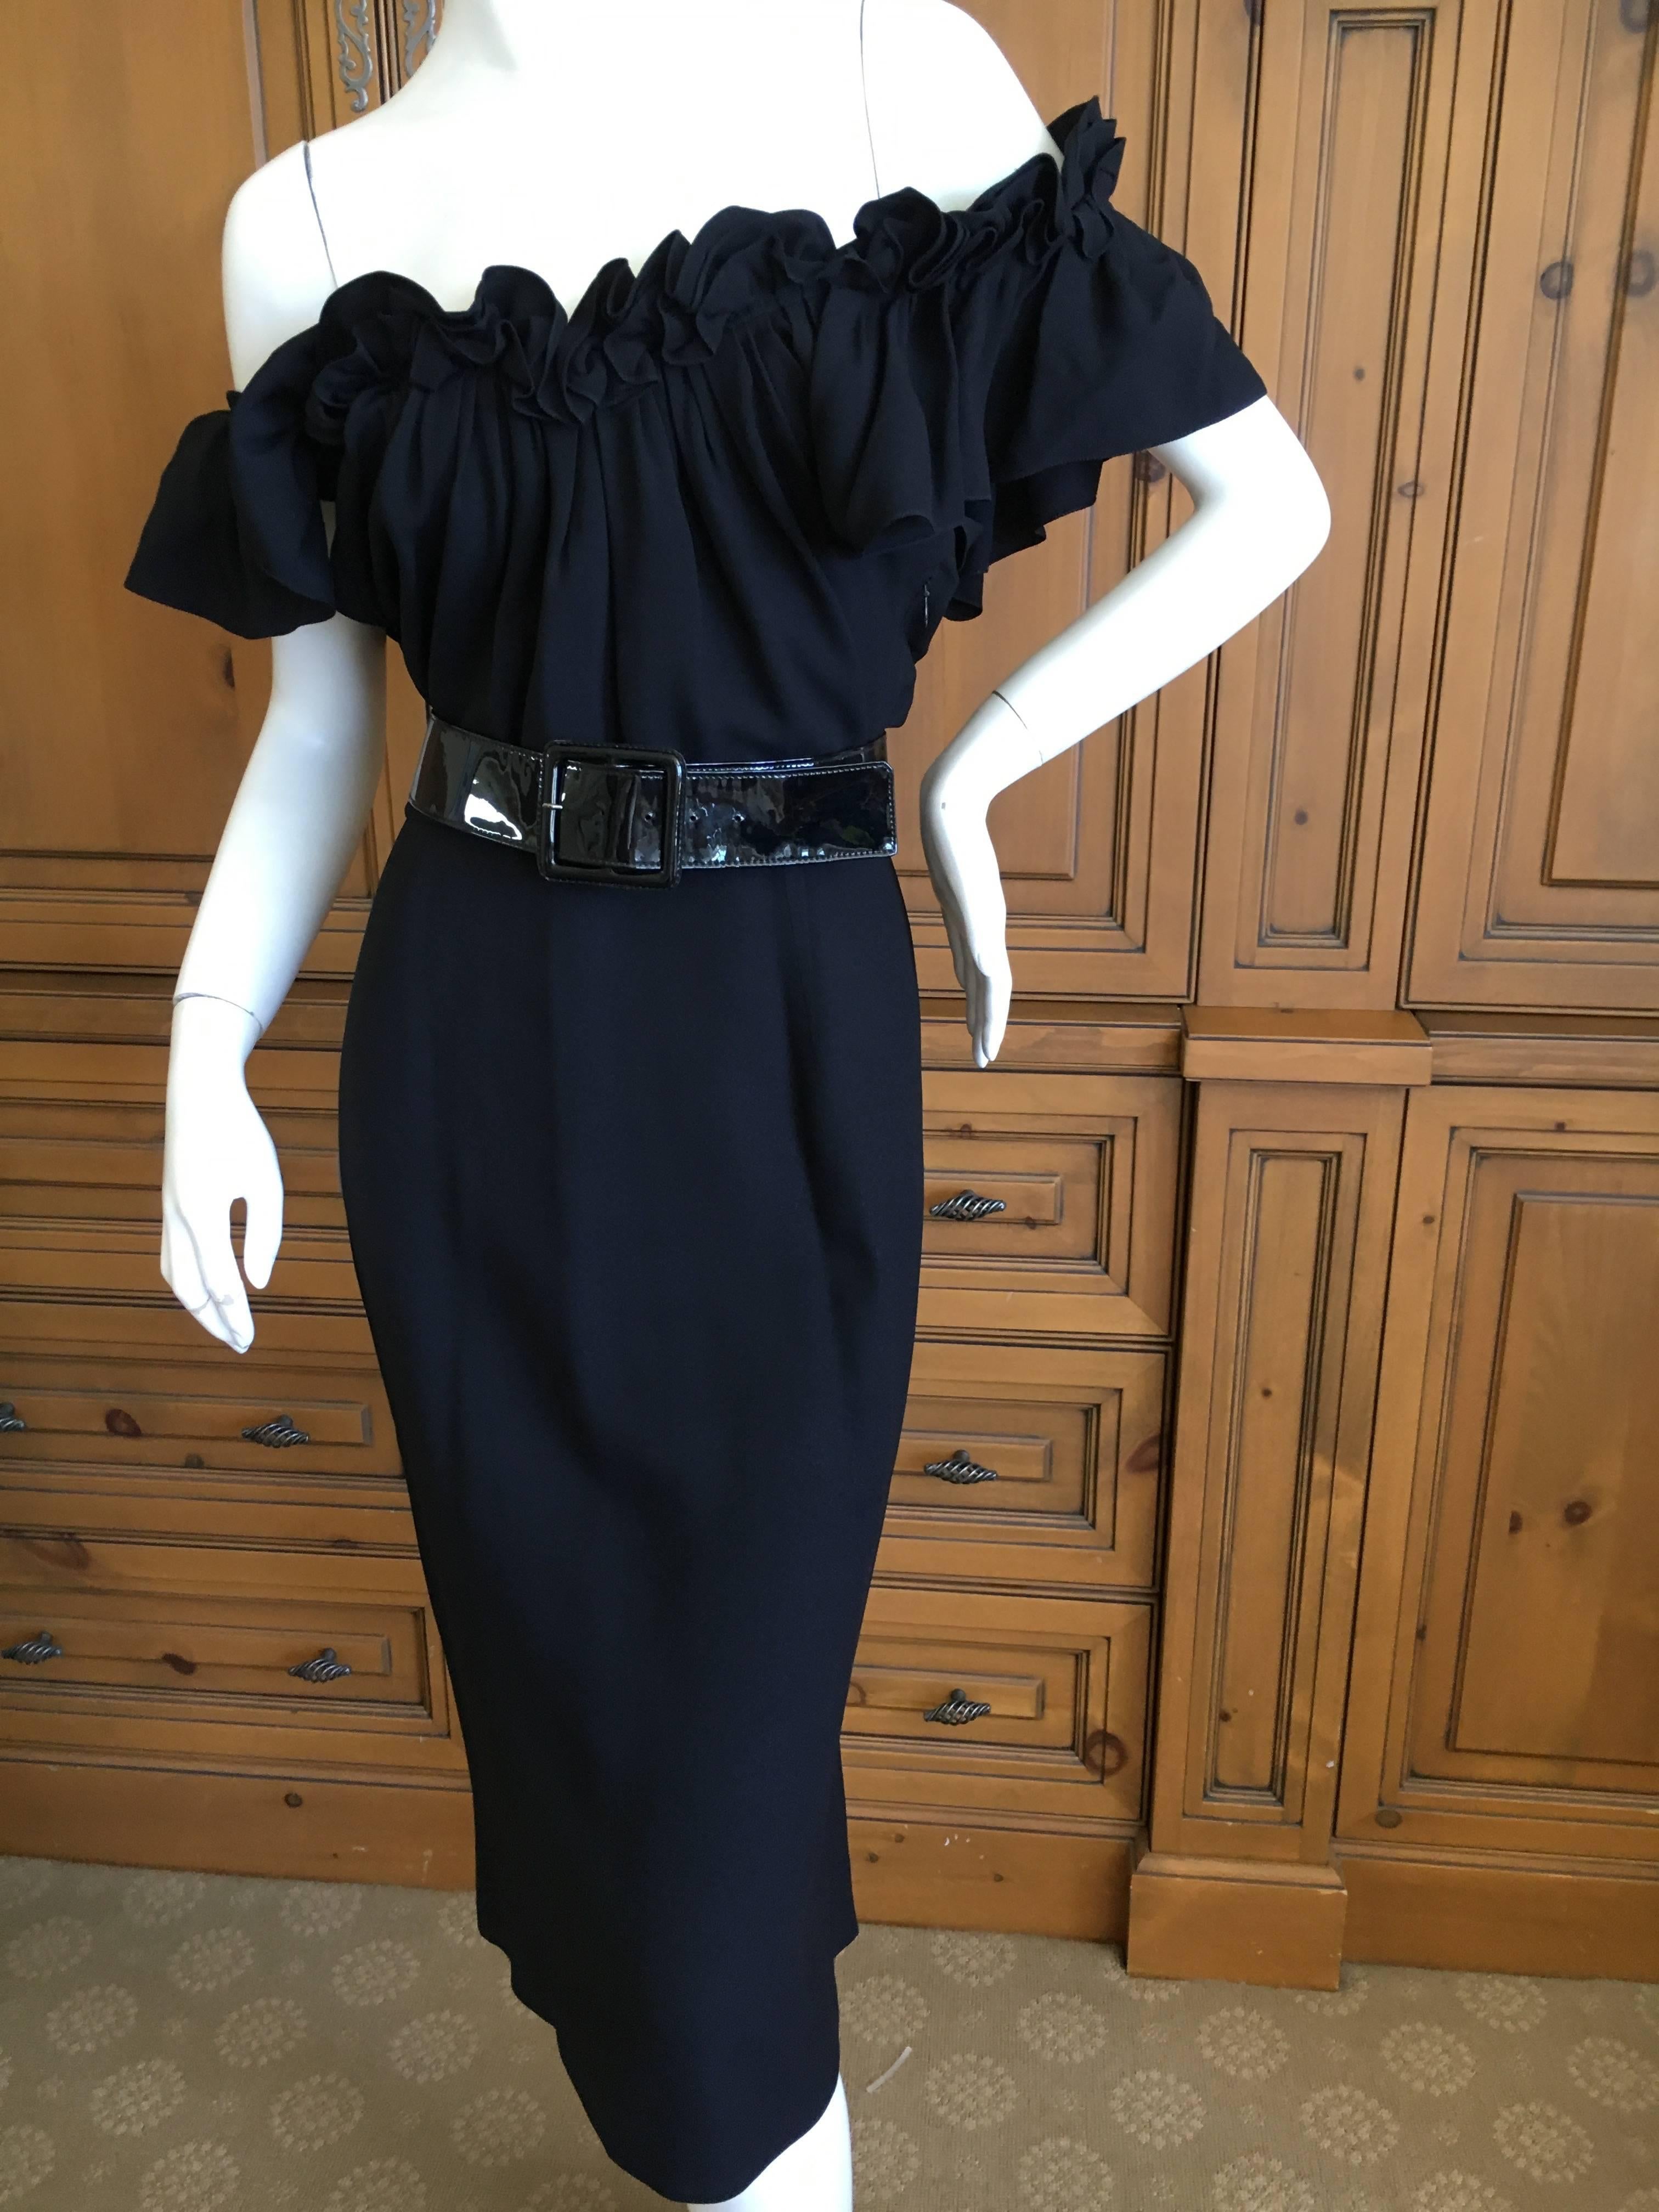 Christian Dior by John Galliano Little Black Dress with Off the Shoulder Ruffle.
The belt in the photos is YSL and will be included, the original belt is no longer with the dress.
Size 38
Bust 38